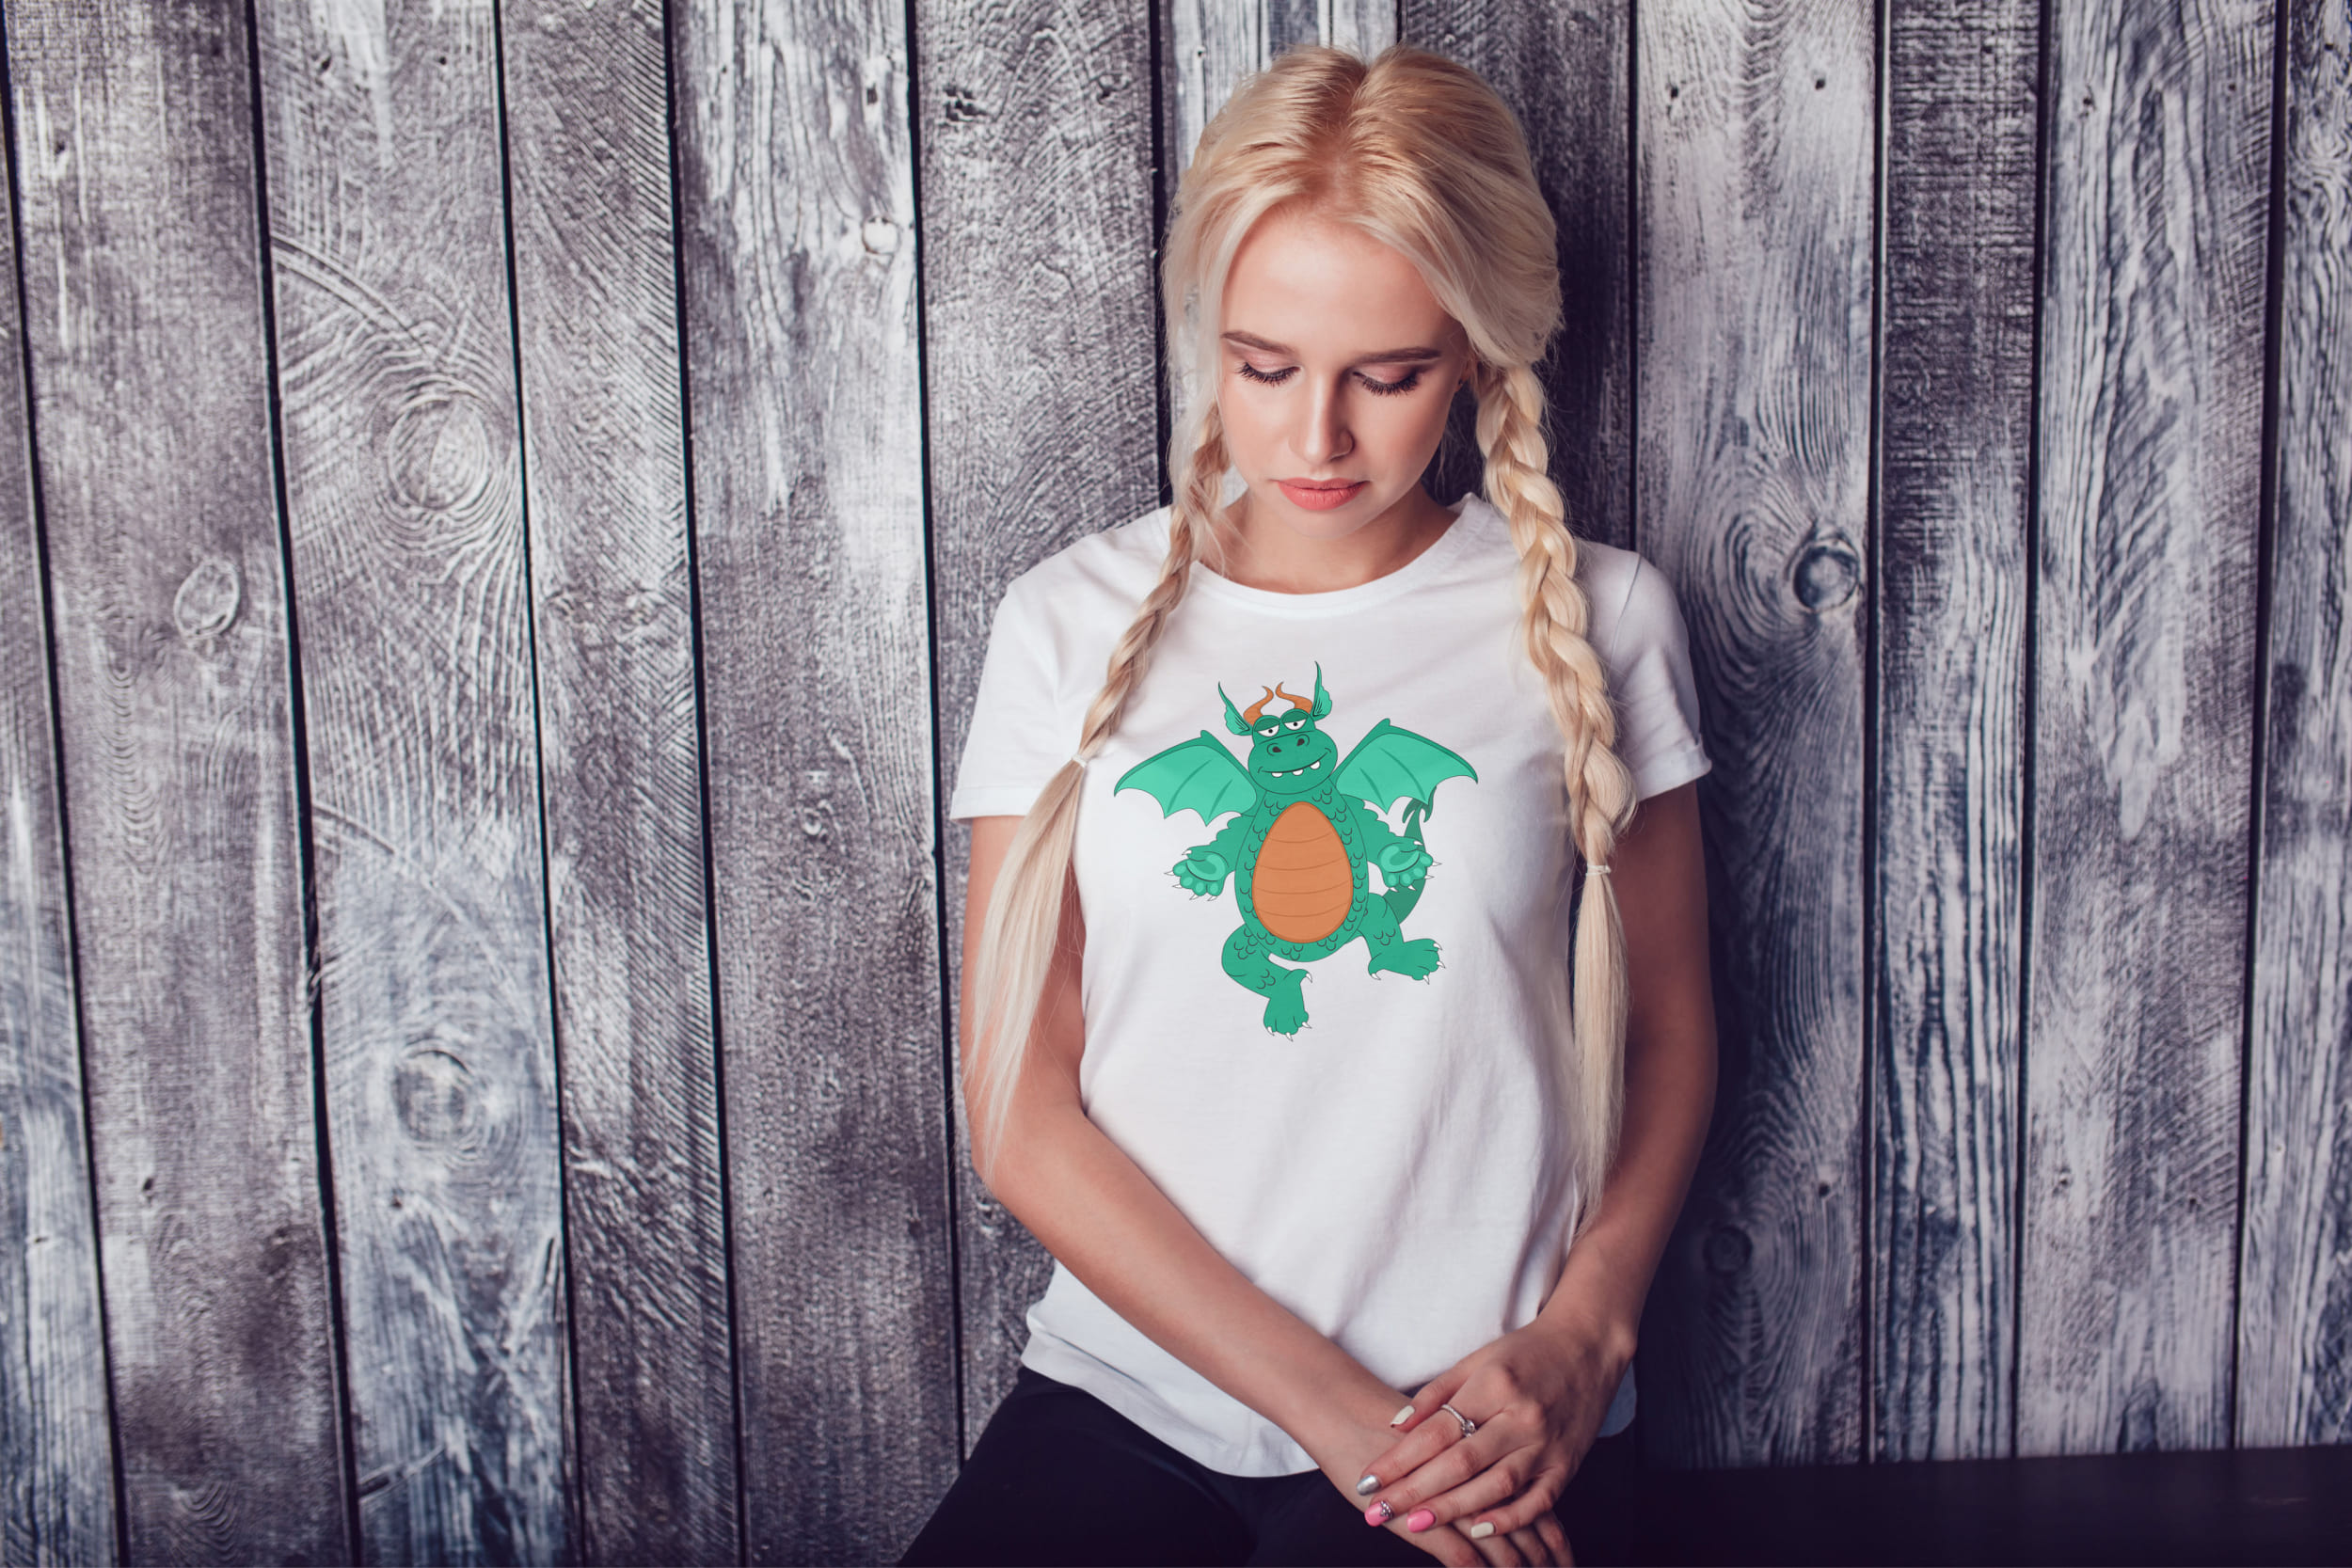 A girl with blond hair and a white T-shirt with a green dragon.